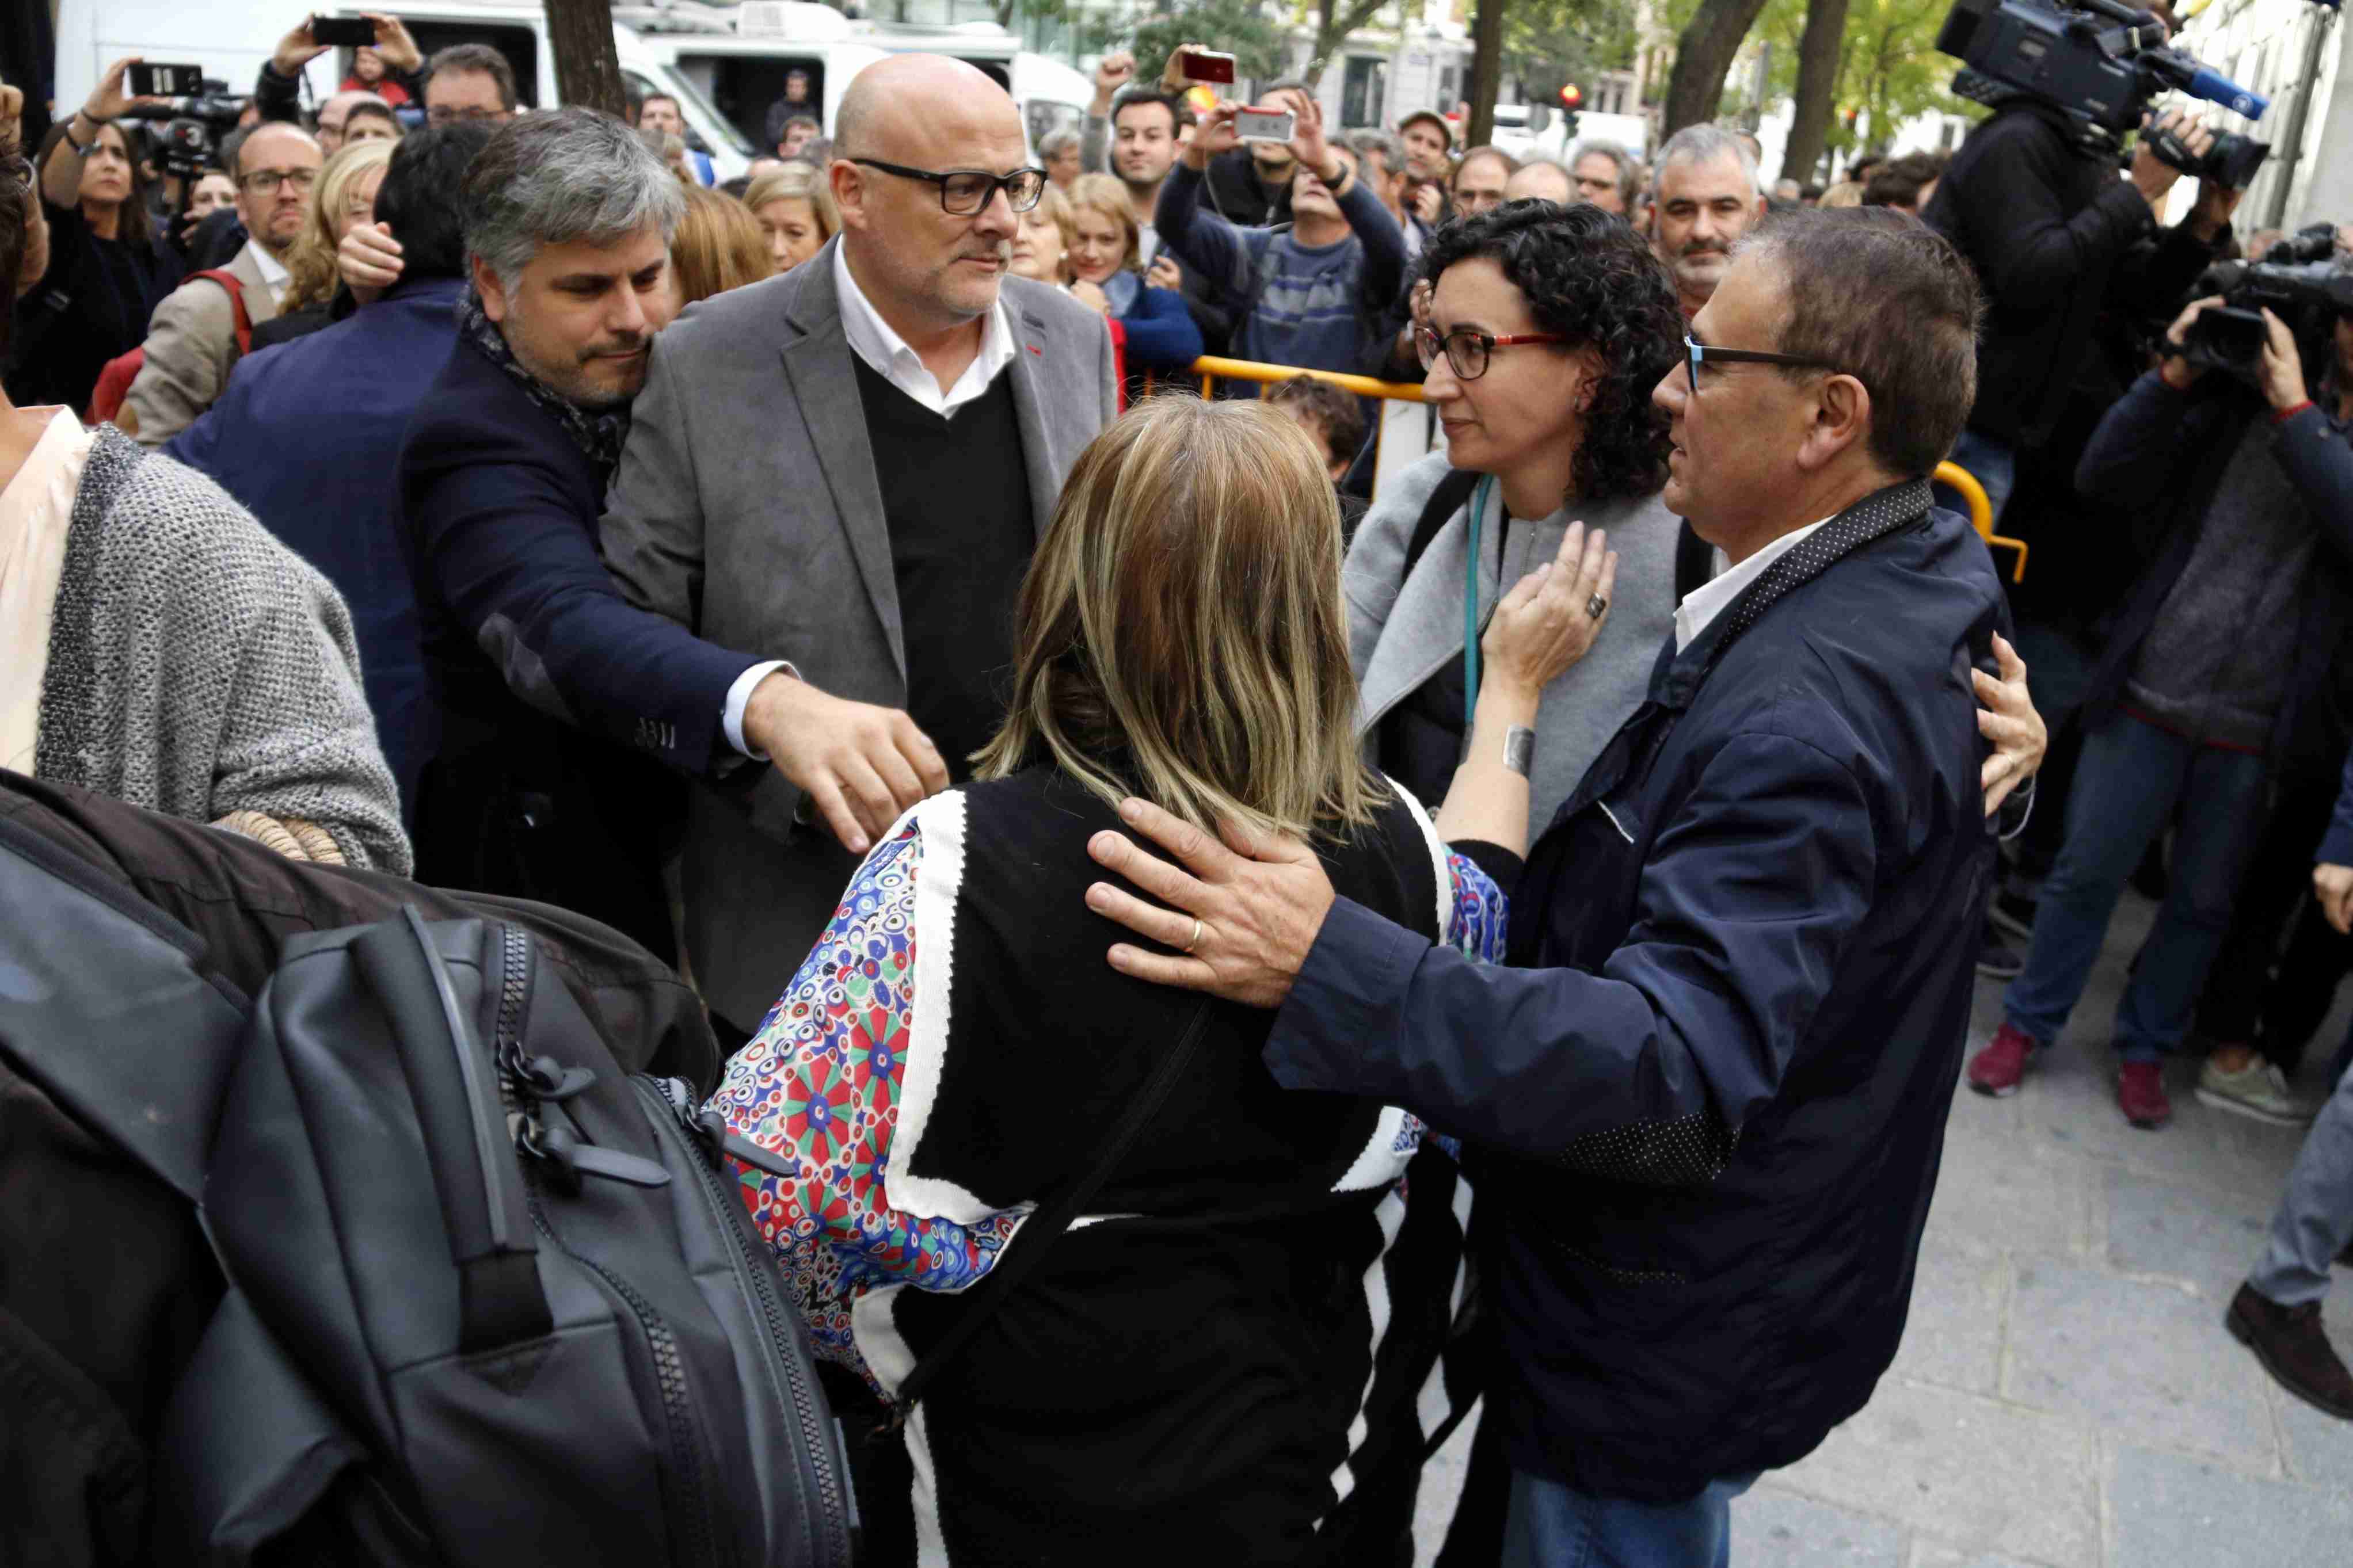 The independence movement's indignation over the imprisonment of Catalan ministers